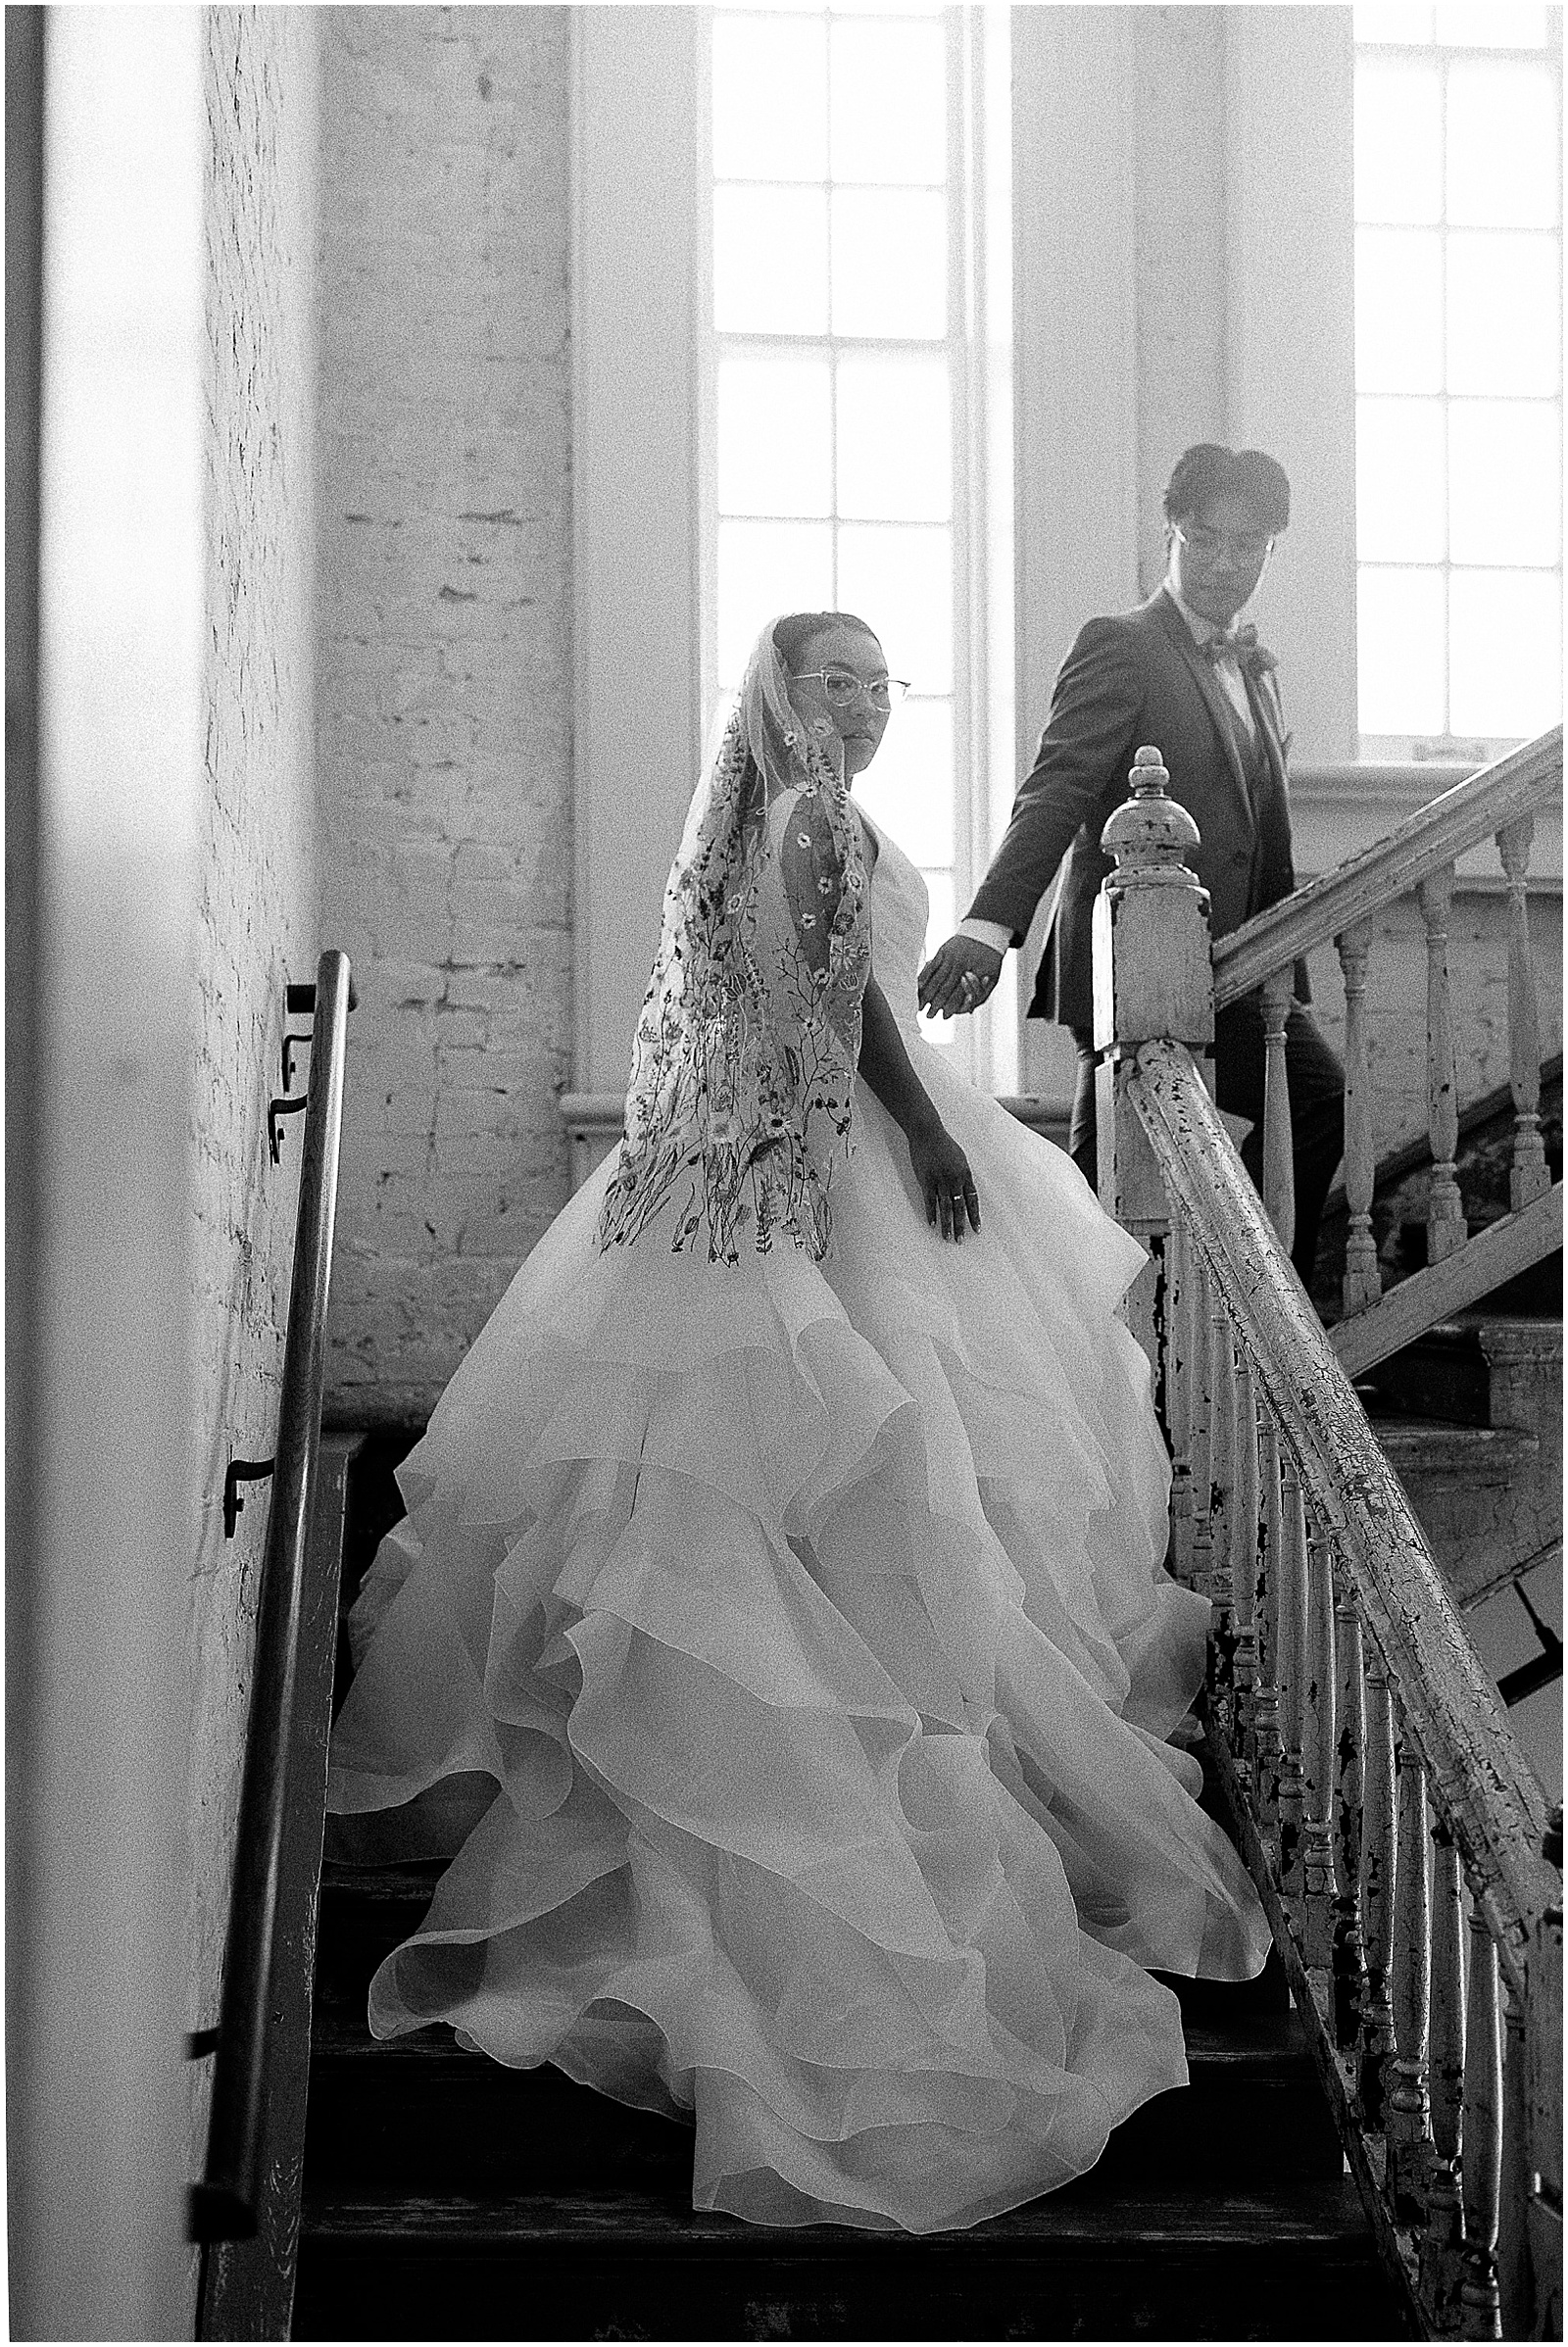 A groom leads a bride up a sunlit staircase inside Felicity Church New Orleans.